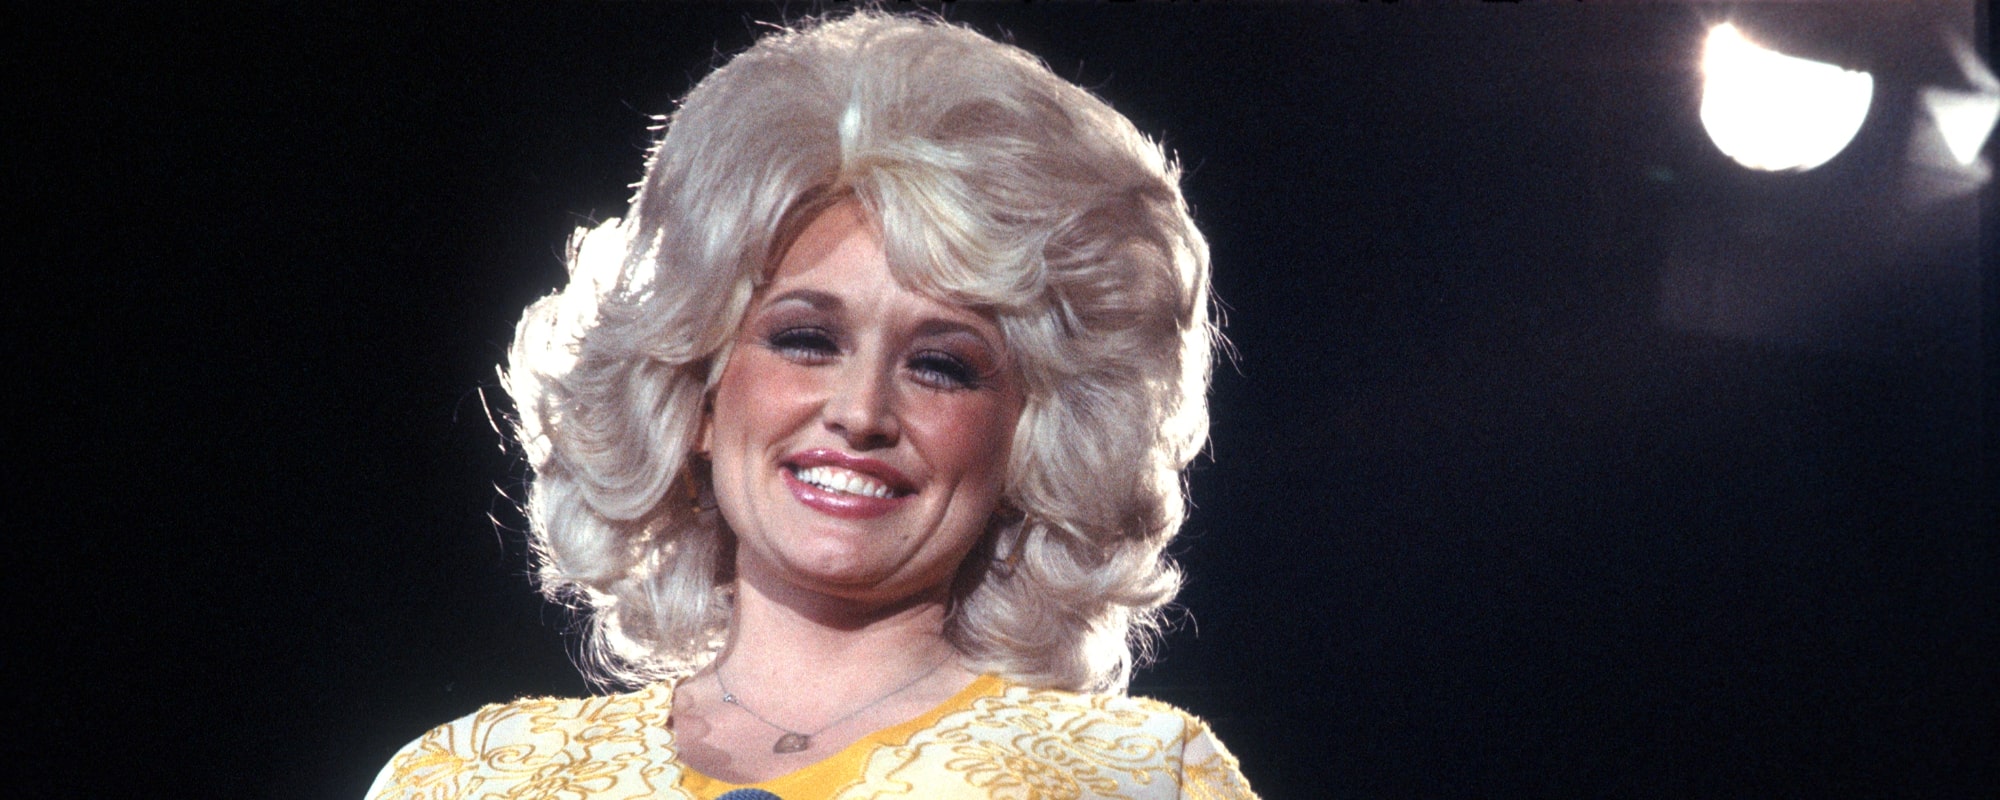 Country Flashback: Dolly Parton Released Her Autobiographical Fan-Favorite ‘My Tennessee Mountain Home’ on This Day in 1973